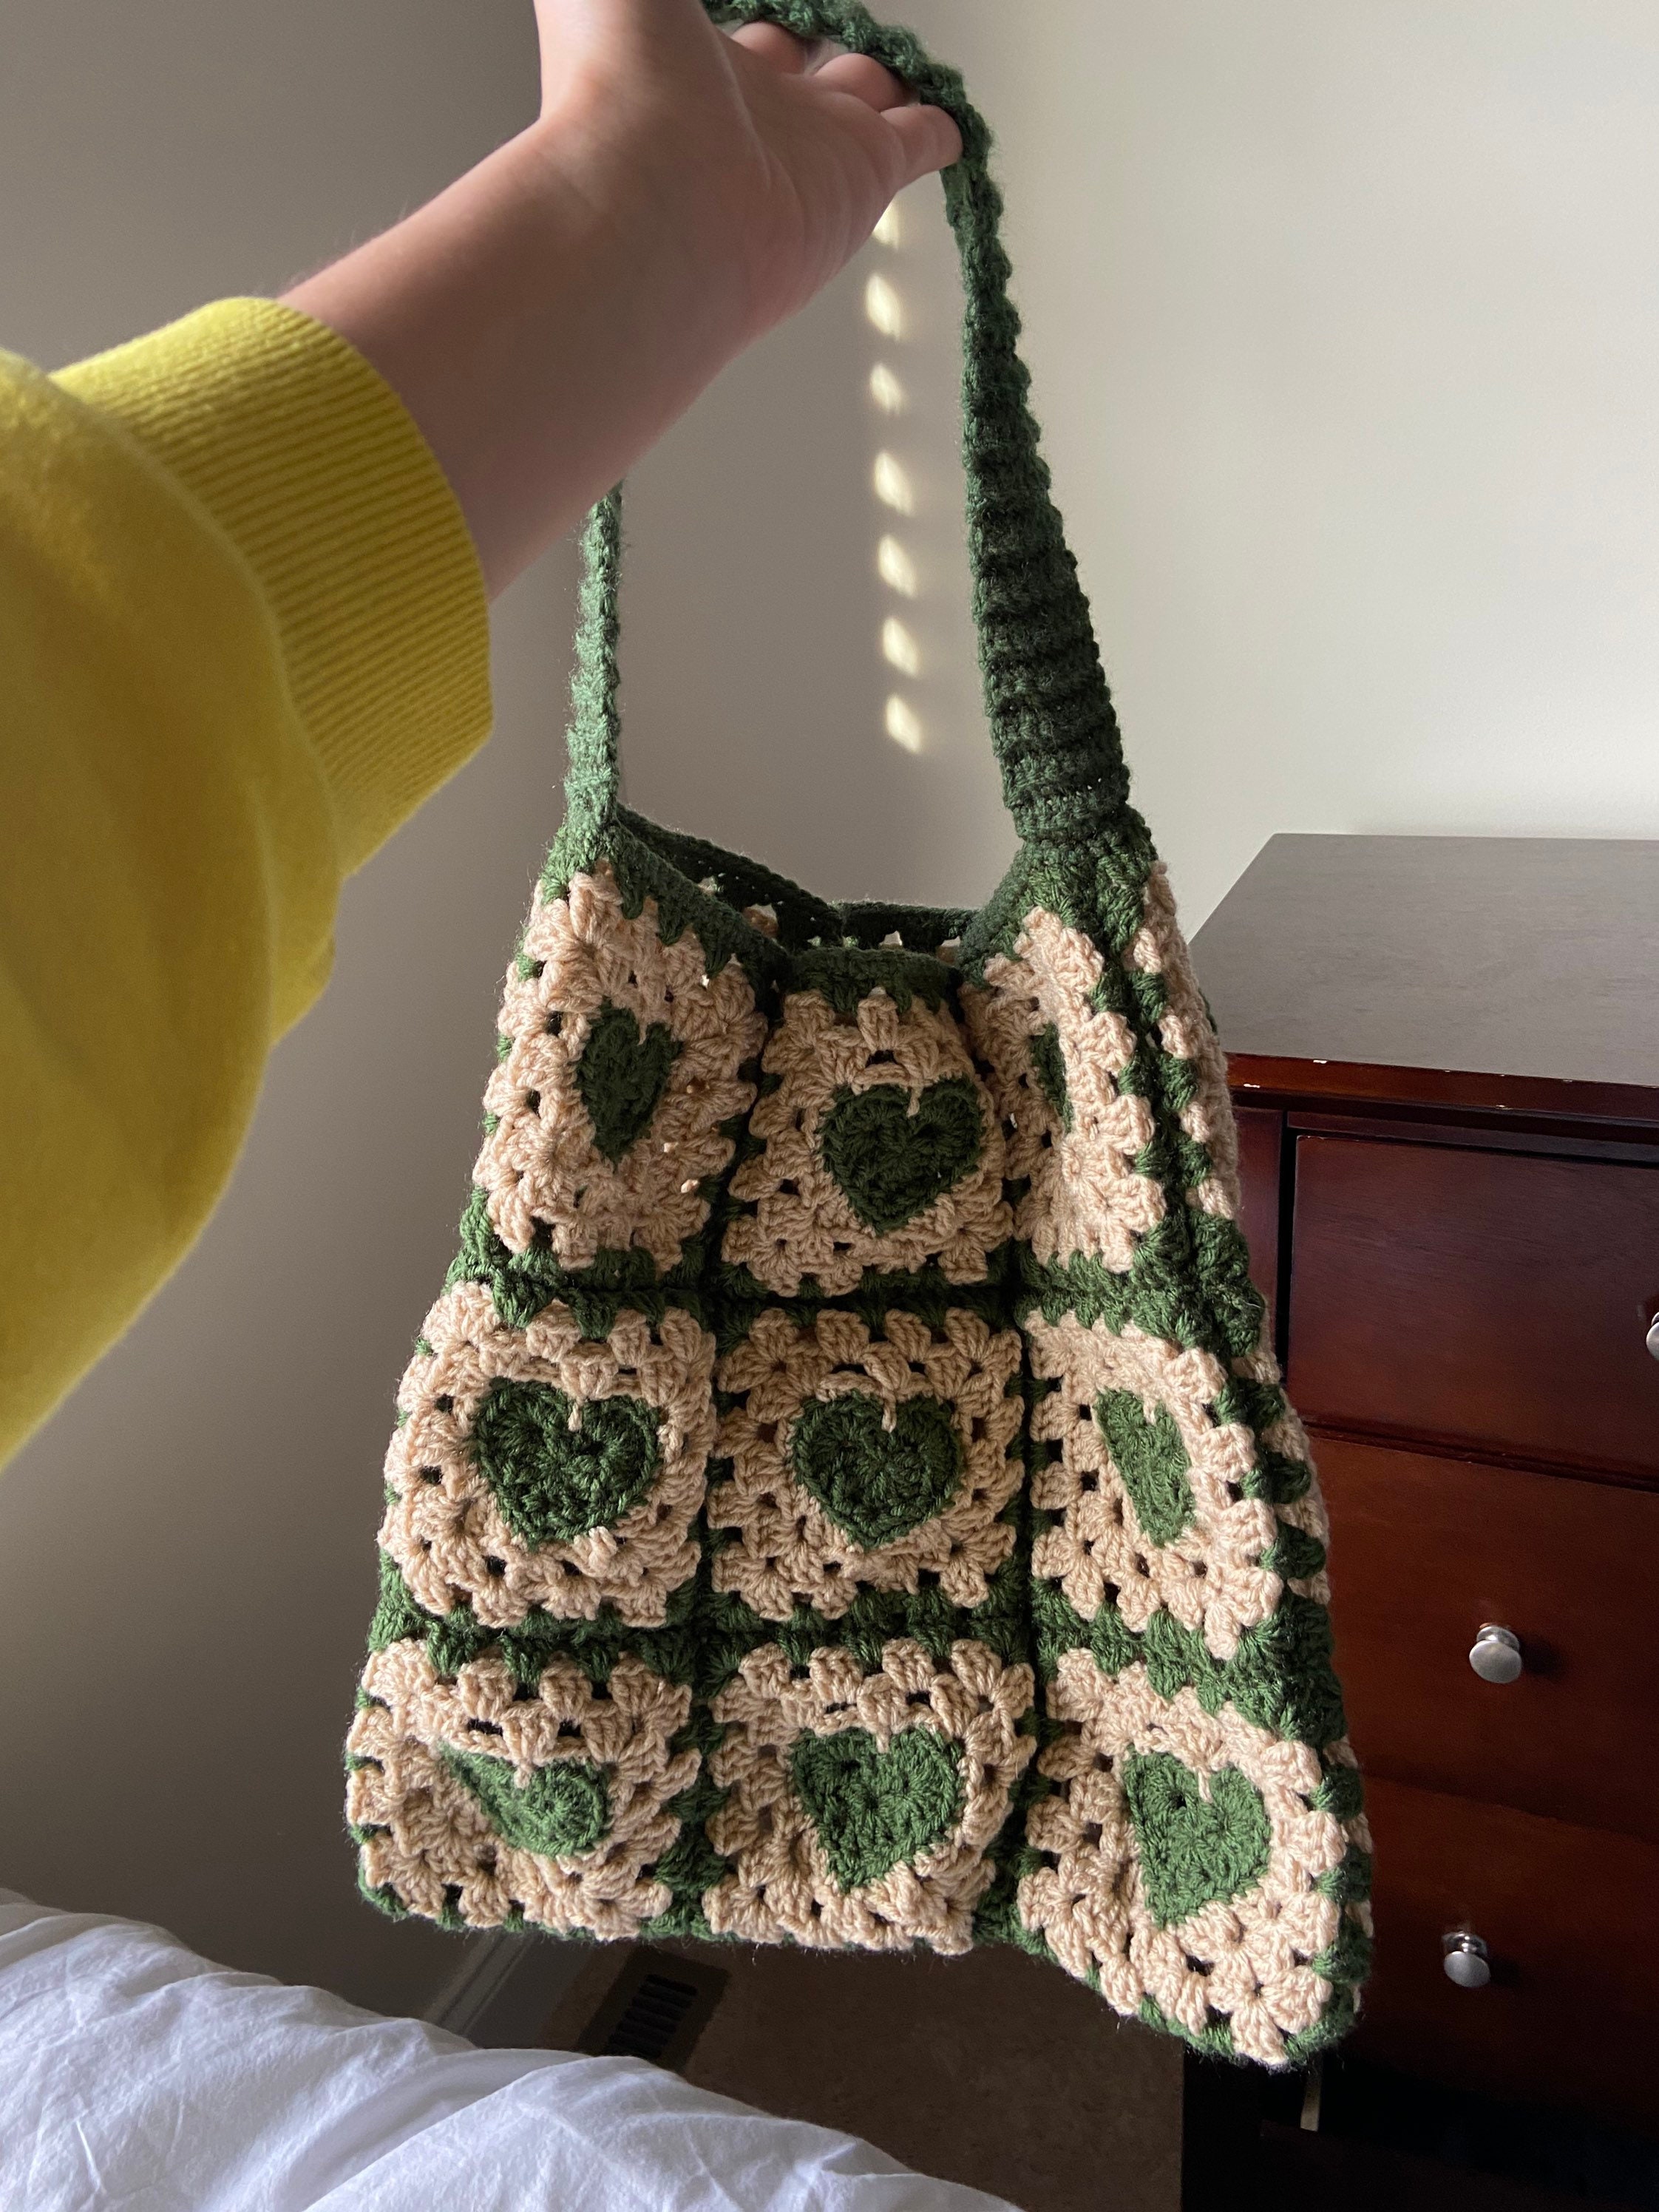 Yimiao Women Shoulder Bag Crochet Heart Pattern Large Capacity Vintage Hollow Out Handbag Tote Bag for Outdoor, Adult Unisex, Green